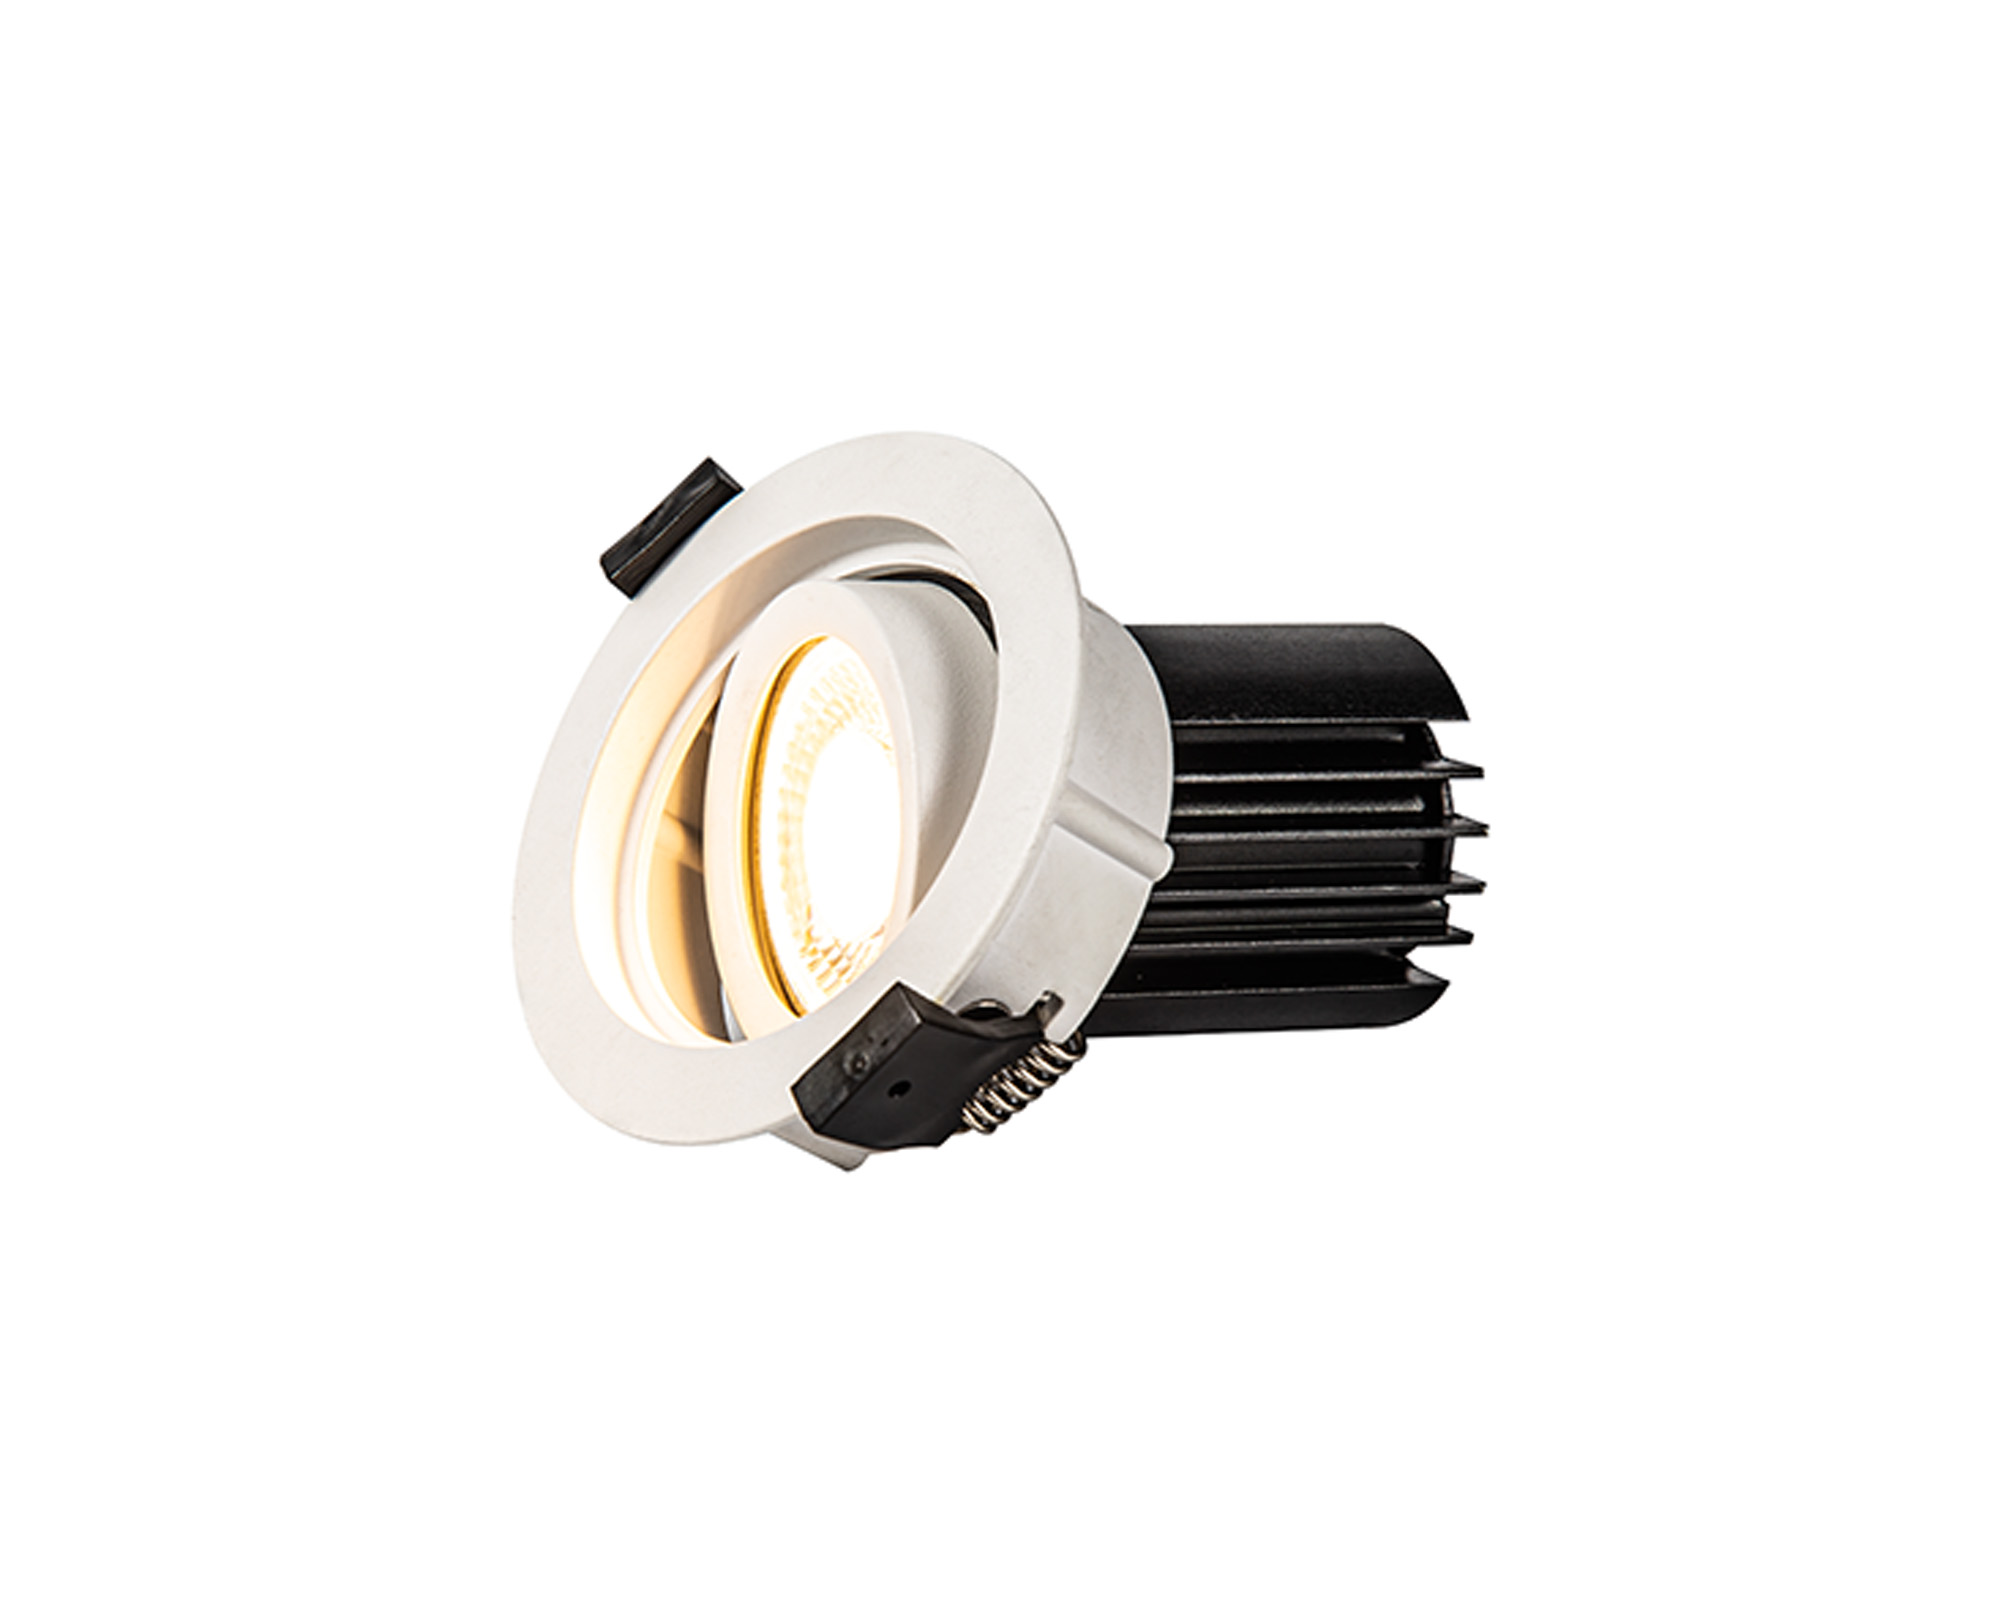 DM202339  Beppe A 12 Tridonic Powered 12W 2700K 1200lm 12° CRI>90 LED Engine White Stepped Adjustable Recessed Spotlight; IP20